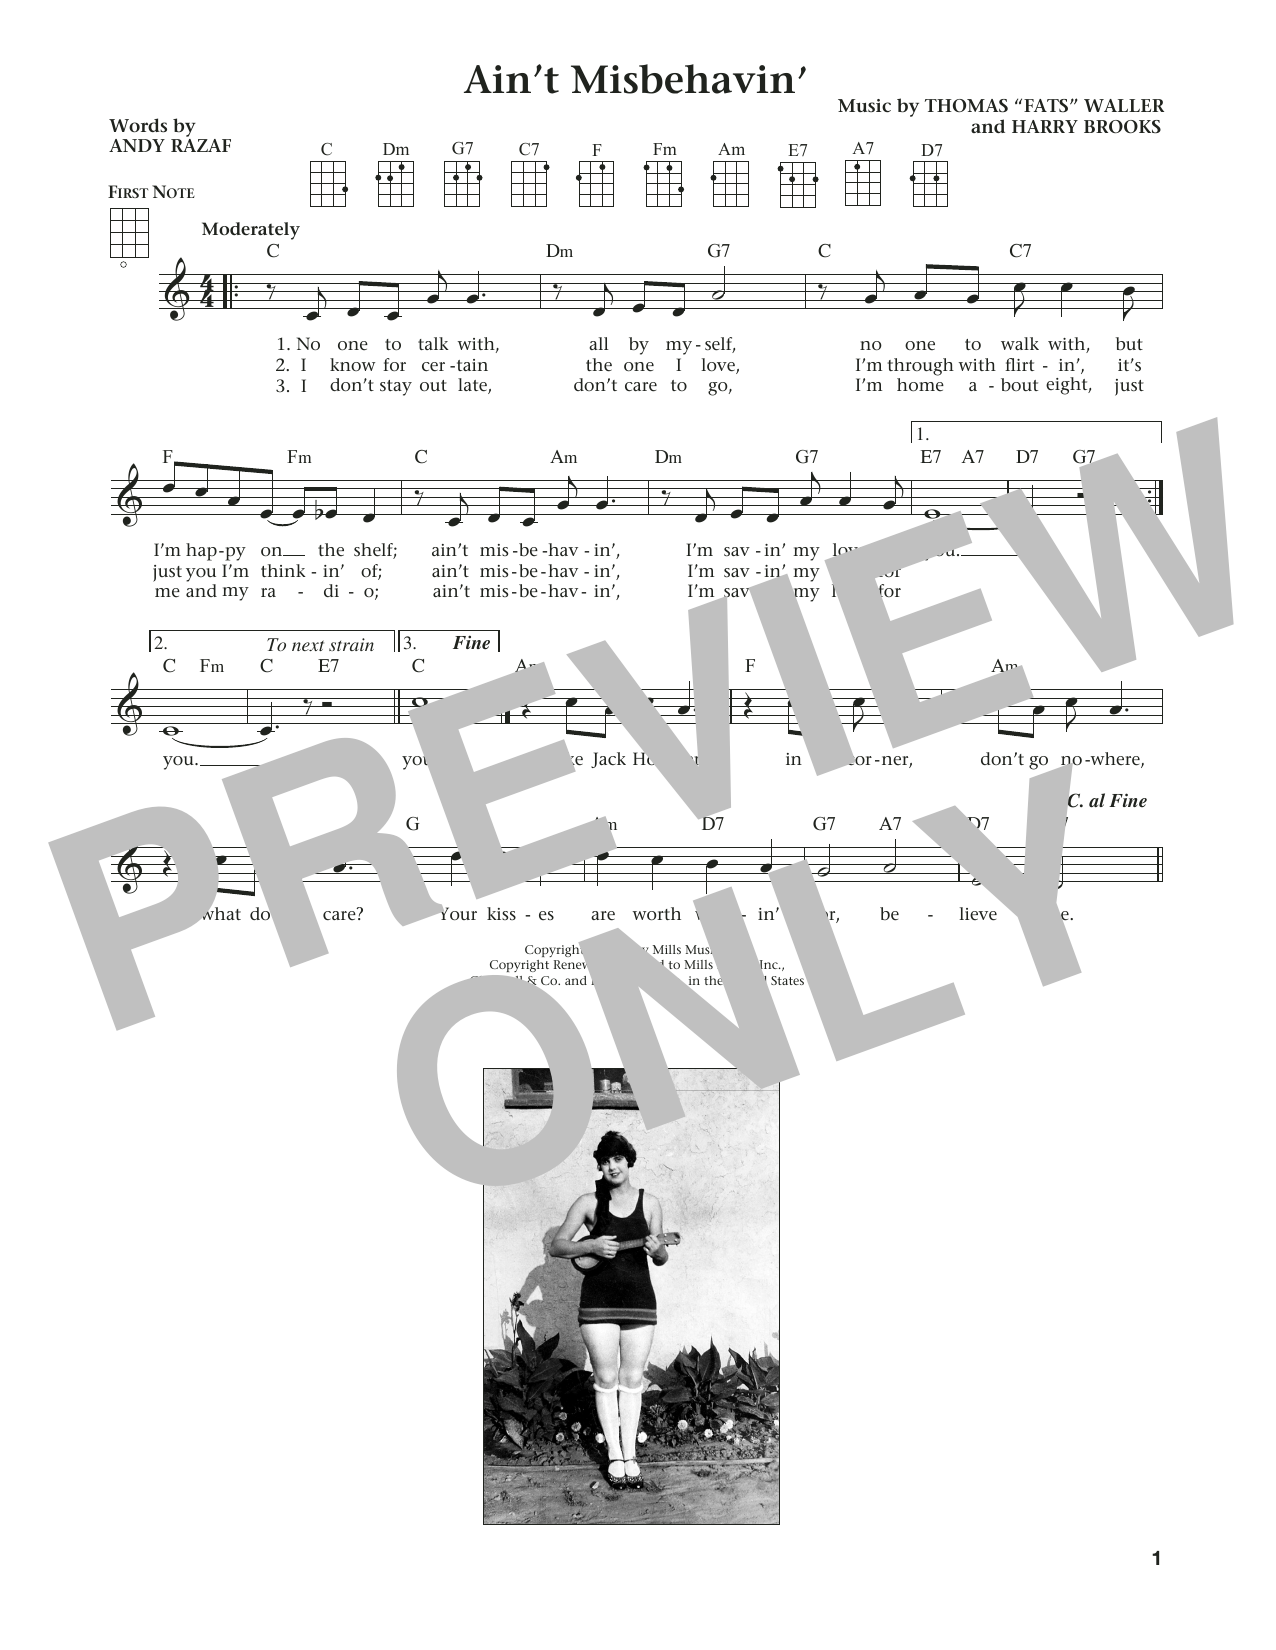 Download Hank Williams, Jr. Ain't Misbehavin' (from The Daily Ukule Sheet Music